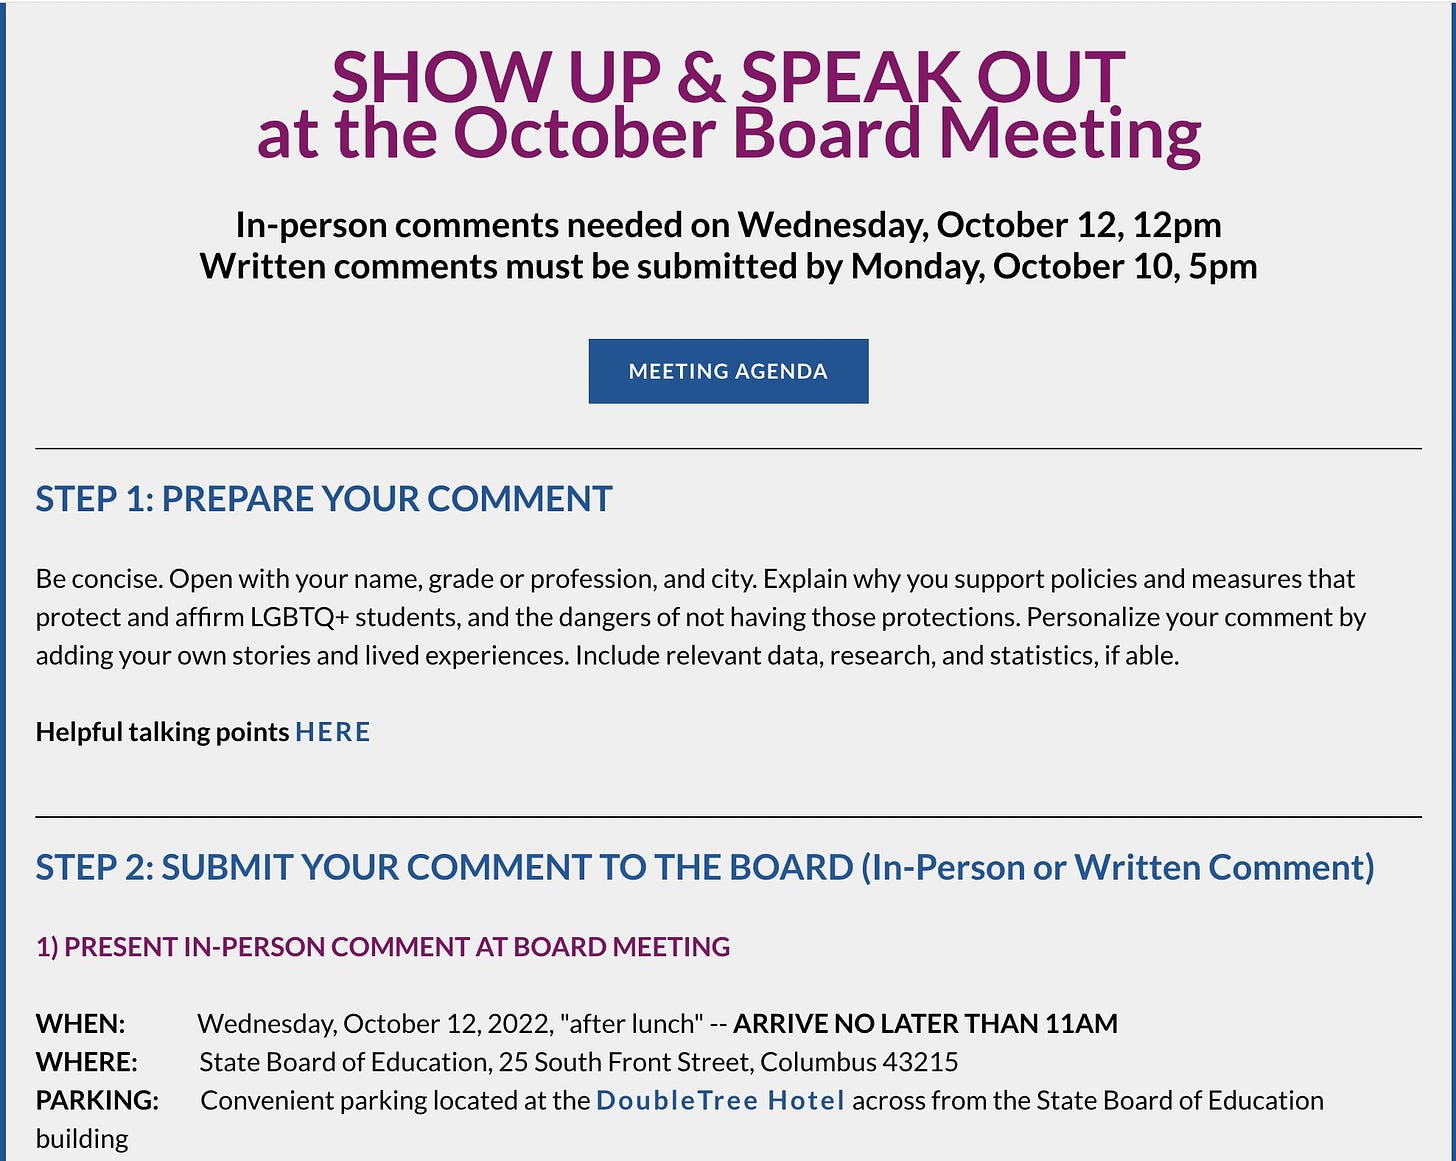 
​SHOW UP & SPEAK OUT
​at the October Board Meeting

​In-person comments needed on Wednesday, October 12, 12pm
Written comments must be submitted by Monday, October 10, 5pm​
MEETING AGENDA
​STEP 1: PREPARE YOUR COMMENT

Be concise. Open with your name, grade or profession, and city. Explain why you support policies and measures that protect and affirm LGBTQ+ students, and the dangers of not having those protections. Personalize your comment by adding your own stories and lived experiences. Include relevant data, research, and statistics, if able.

Helpful talking points HERE ​
STEP 2: SUBMIT YOUR COMMENT TO THE BOARD (In-Person or Written Comment)

1) PRESENT IN-PERSON COMMENT AT BOARD MEETING 

WHEN:              Wednesday, October 12, 2022, "after lunch" -- ARRIVE NO LATER THAN 11AM
WHERE:            State Board of Education, 25 South Front Street, Columbus 43215
PARKING:        Convenient parking located at the DoubleTree Hotel across from the State Board of Education